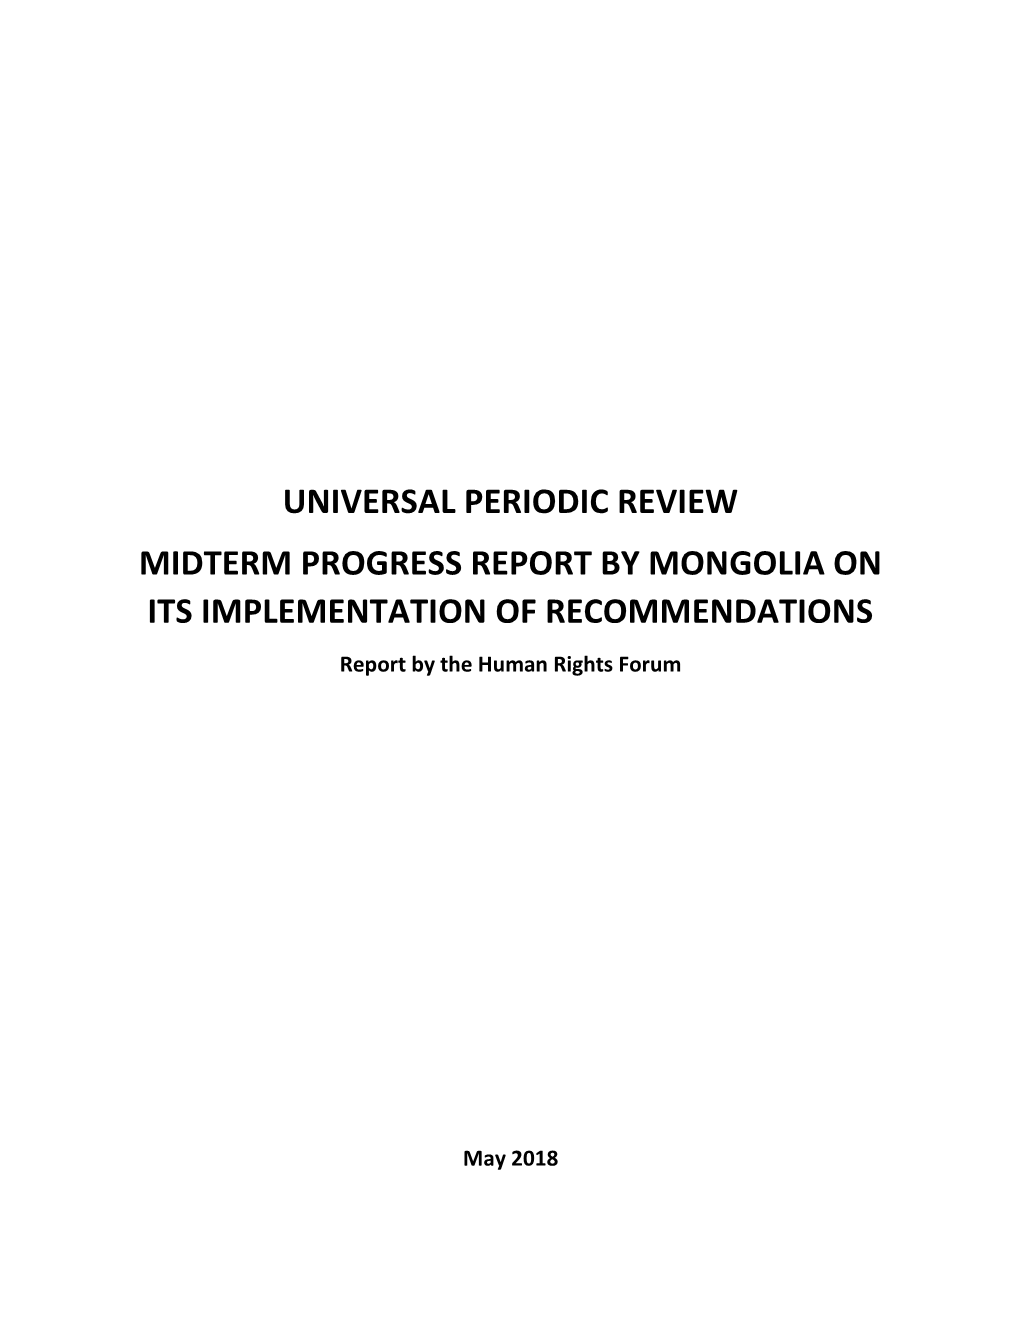 UNIVERSAL PERIODIC REVIEW MIDTERM PROGRESS REPORT by MONGOLIA on ITS IMPLEMENTATION of RECOMMENDATIONS Report by the Human Rights Forum